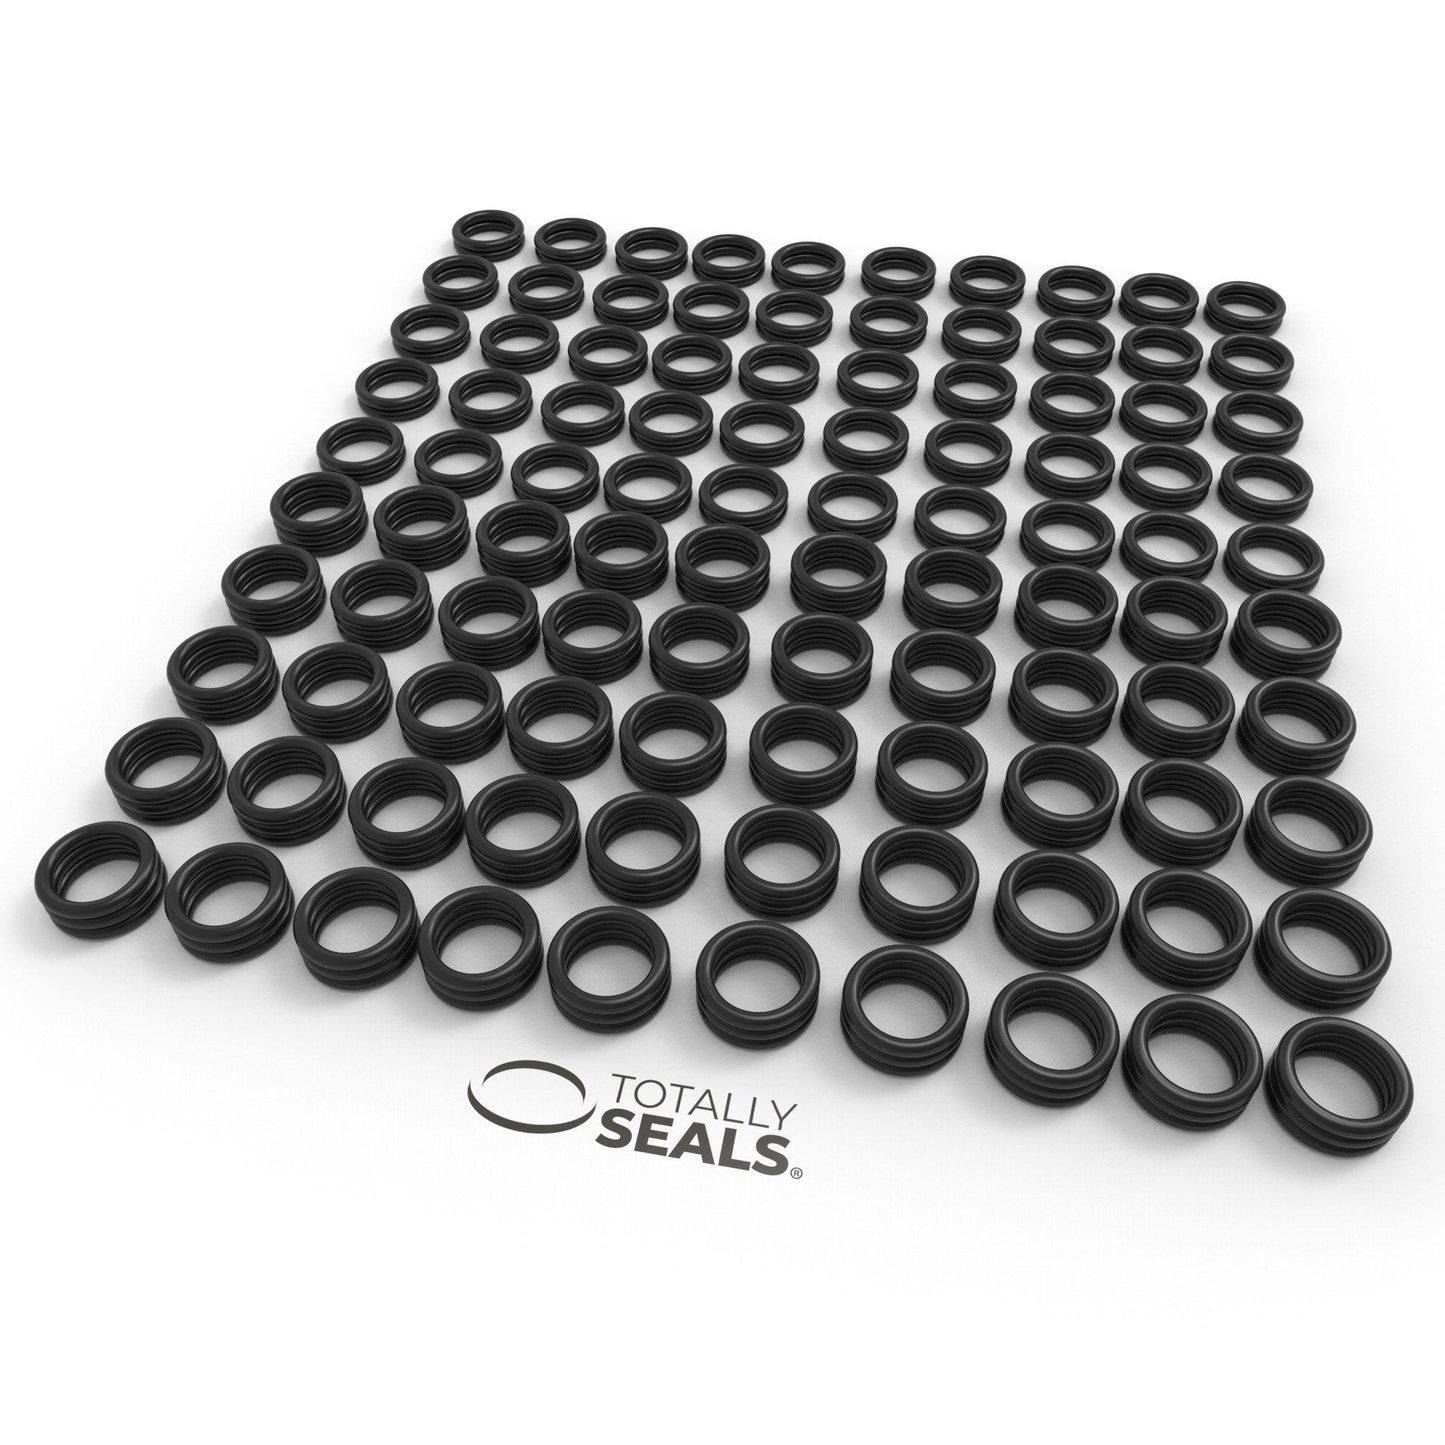 18mm x 1.5mm (21mm OD) Nitrile O-Rings - Totally Seals®